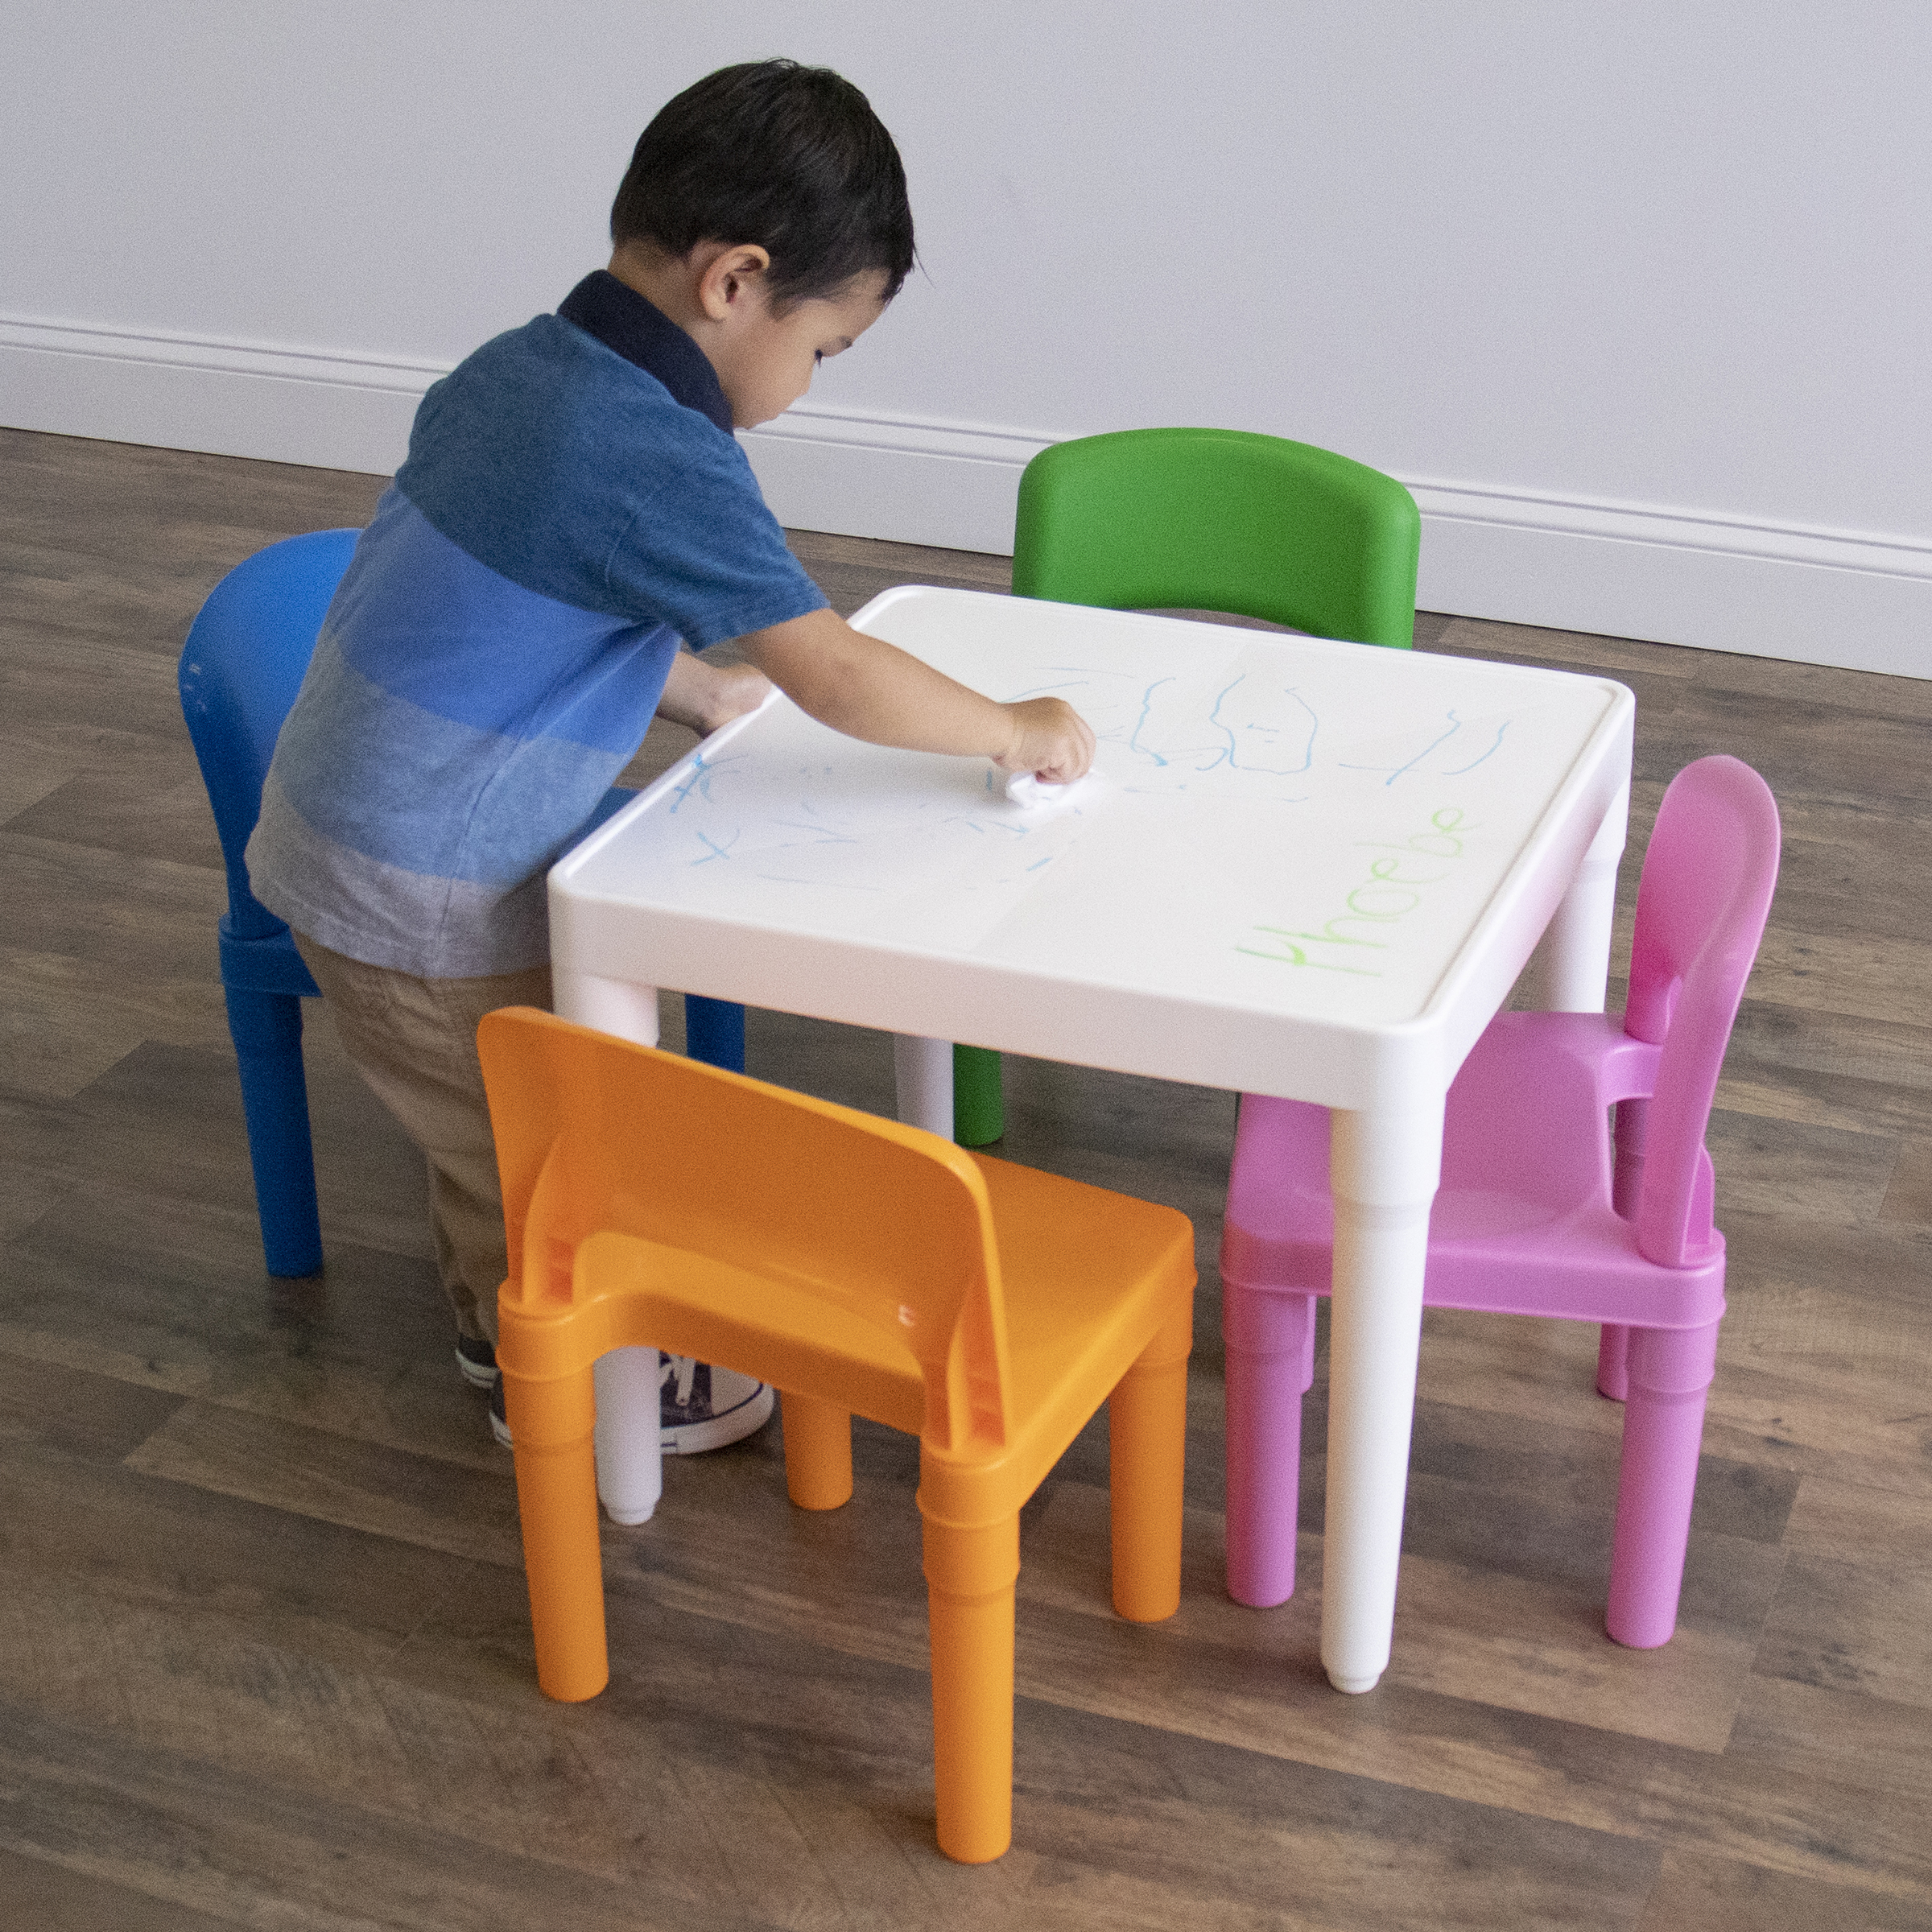 Humble Crew Lightweight Kids Plastic Dry Erase Table and 4 Chair Set, Multicolor - image 3 of 8